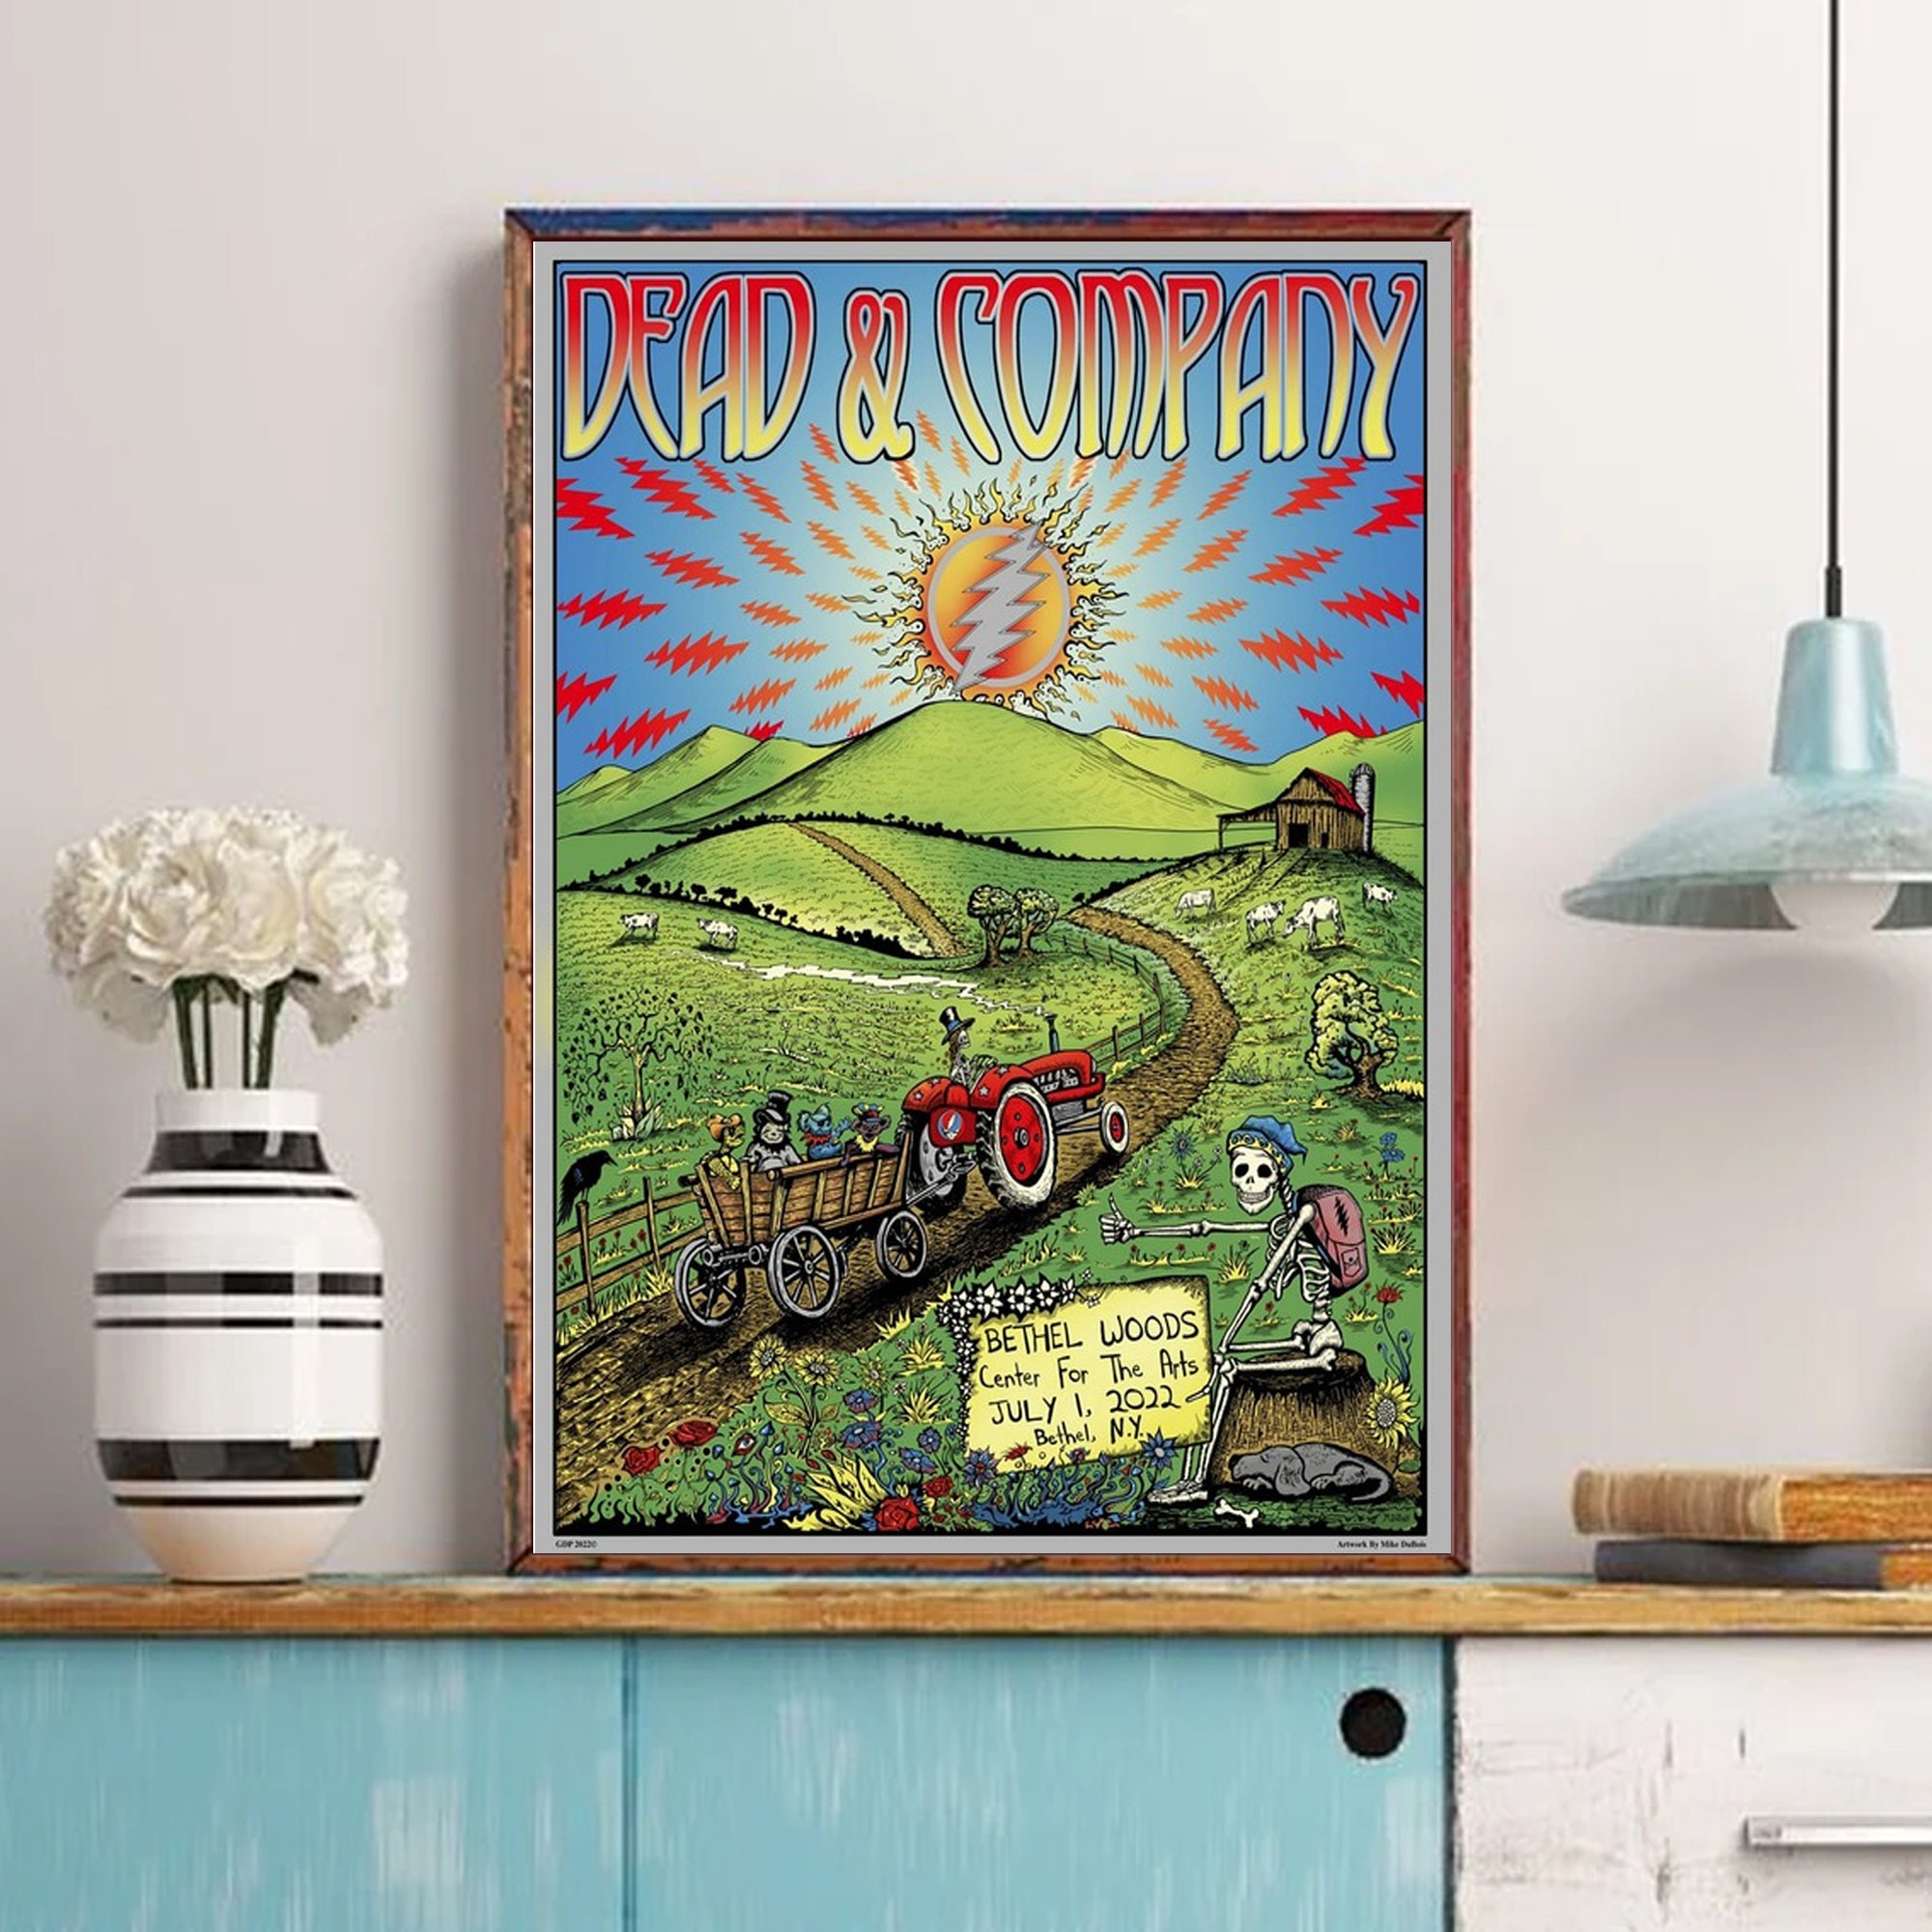 2022 Dead and Company Bethel woods Canvas Poster, Dead And Co Summer 2022 Tour Poster